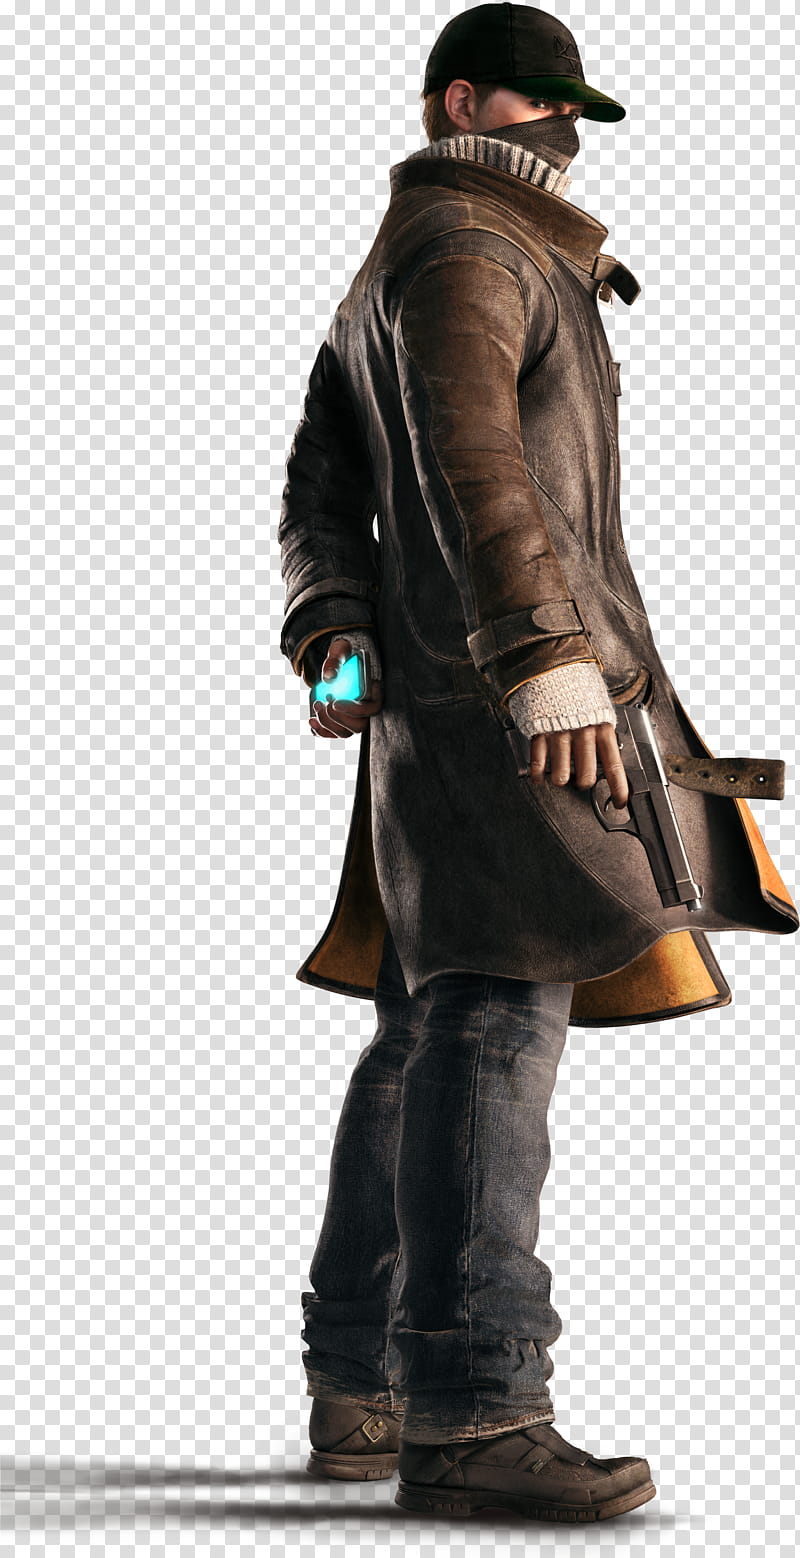 Dogs, Watch Dogs, Watch Dogs 2, Aiden Pearce, Video Games, Character, Concept Art, Protagonist transparent background PNG clipart